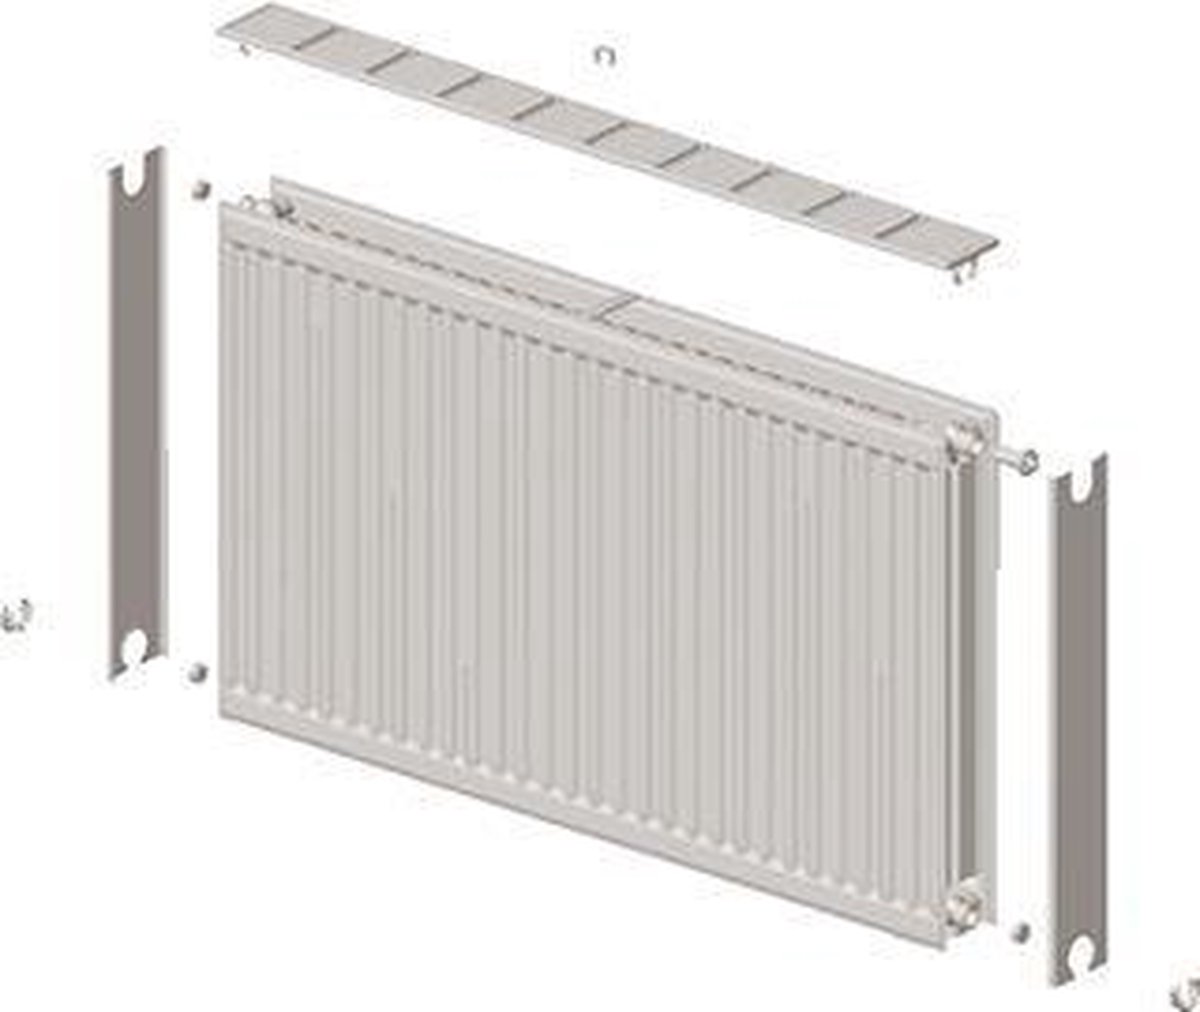 Stelrad paneelradiator Novello, staal, wit, (hxlxd) 700x900x100mm, 22